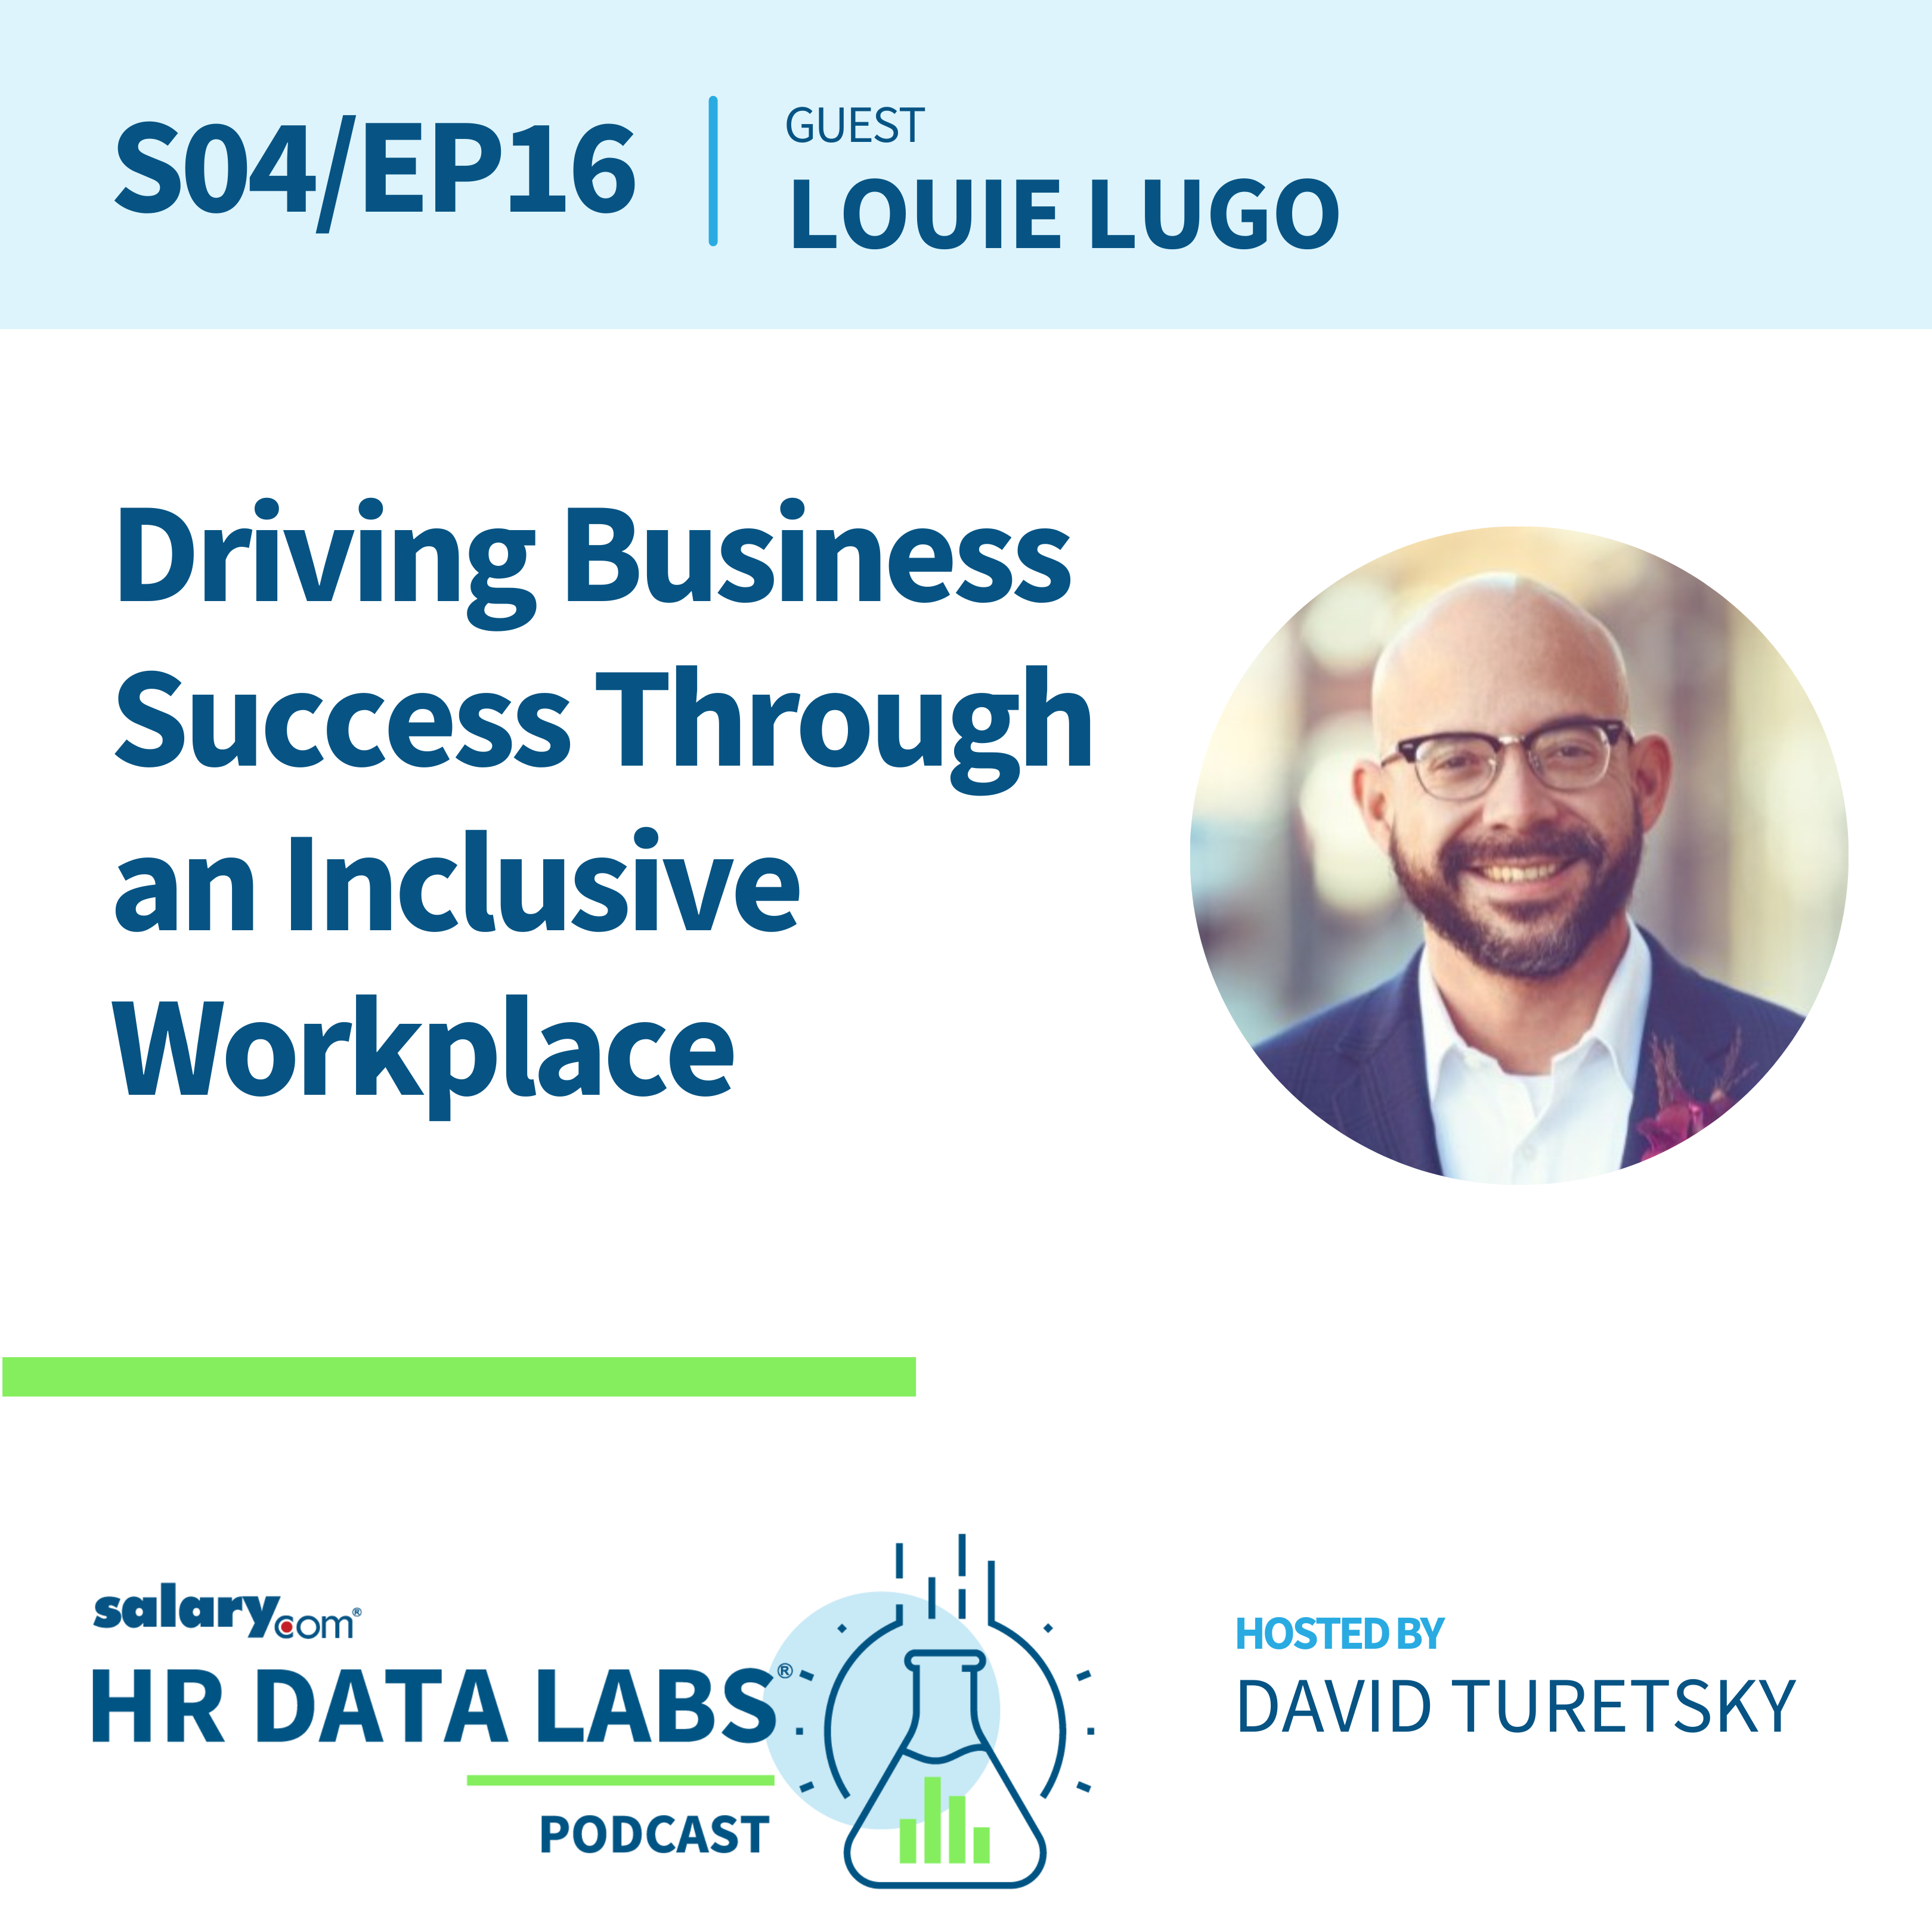 Louie Lugo – Driving Business Success Through an Inclusive Workplace